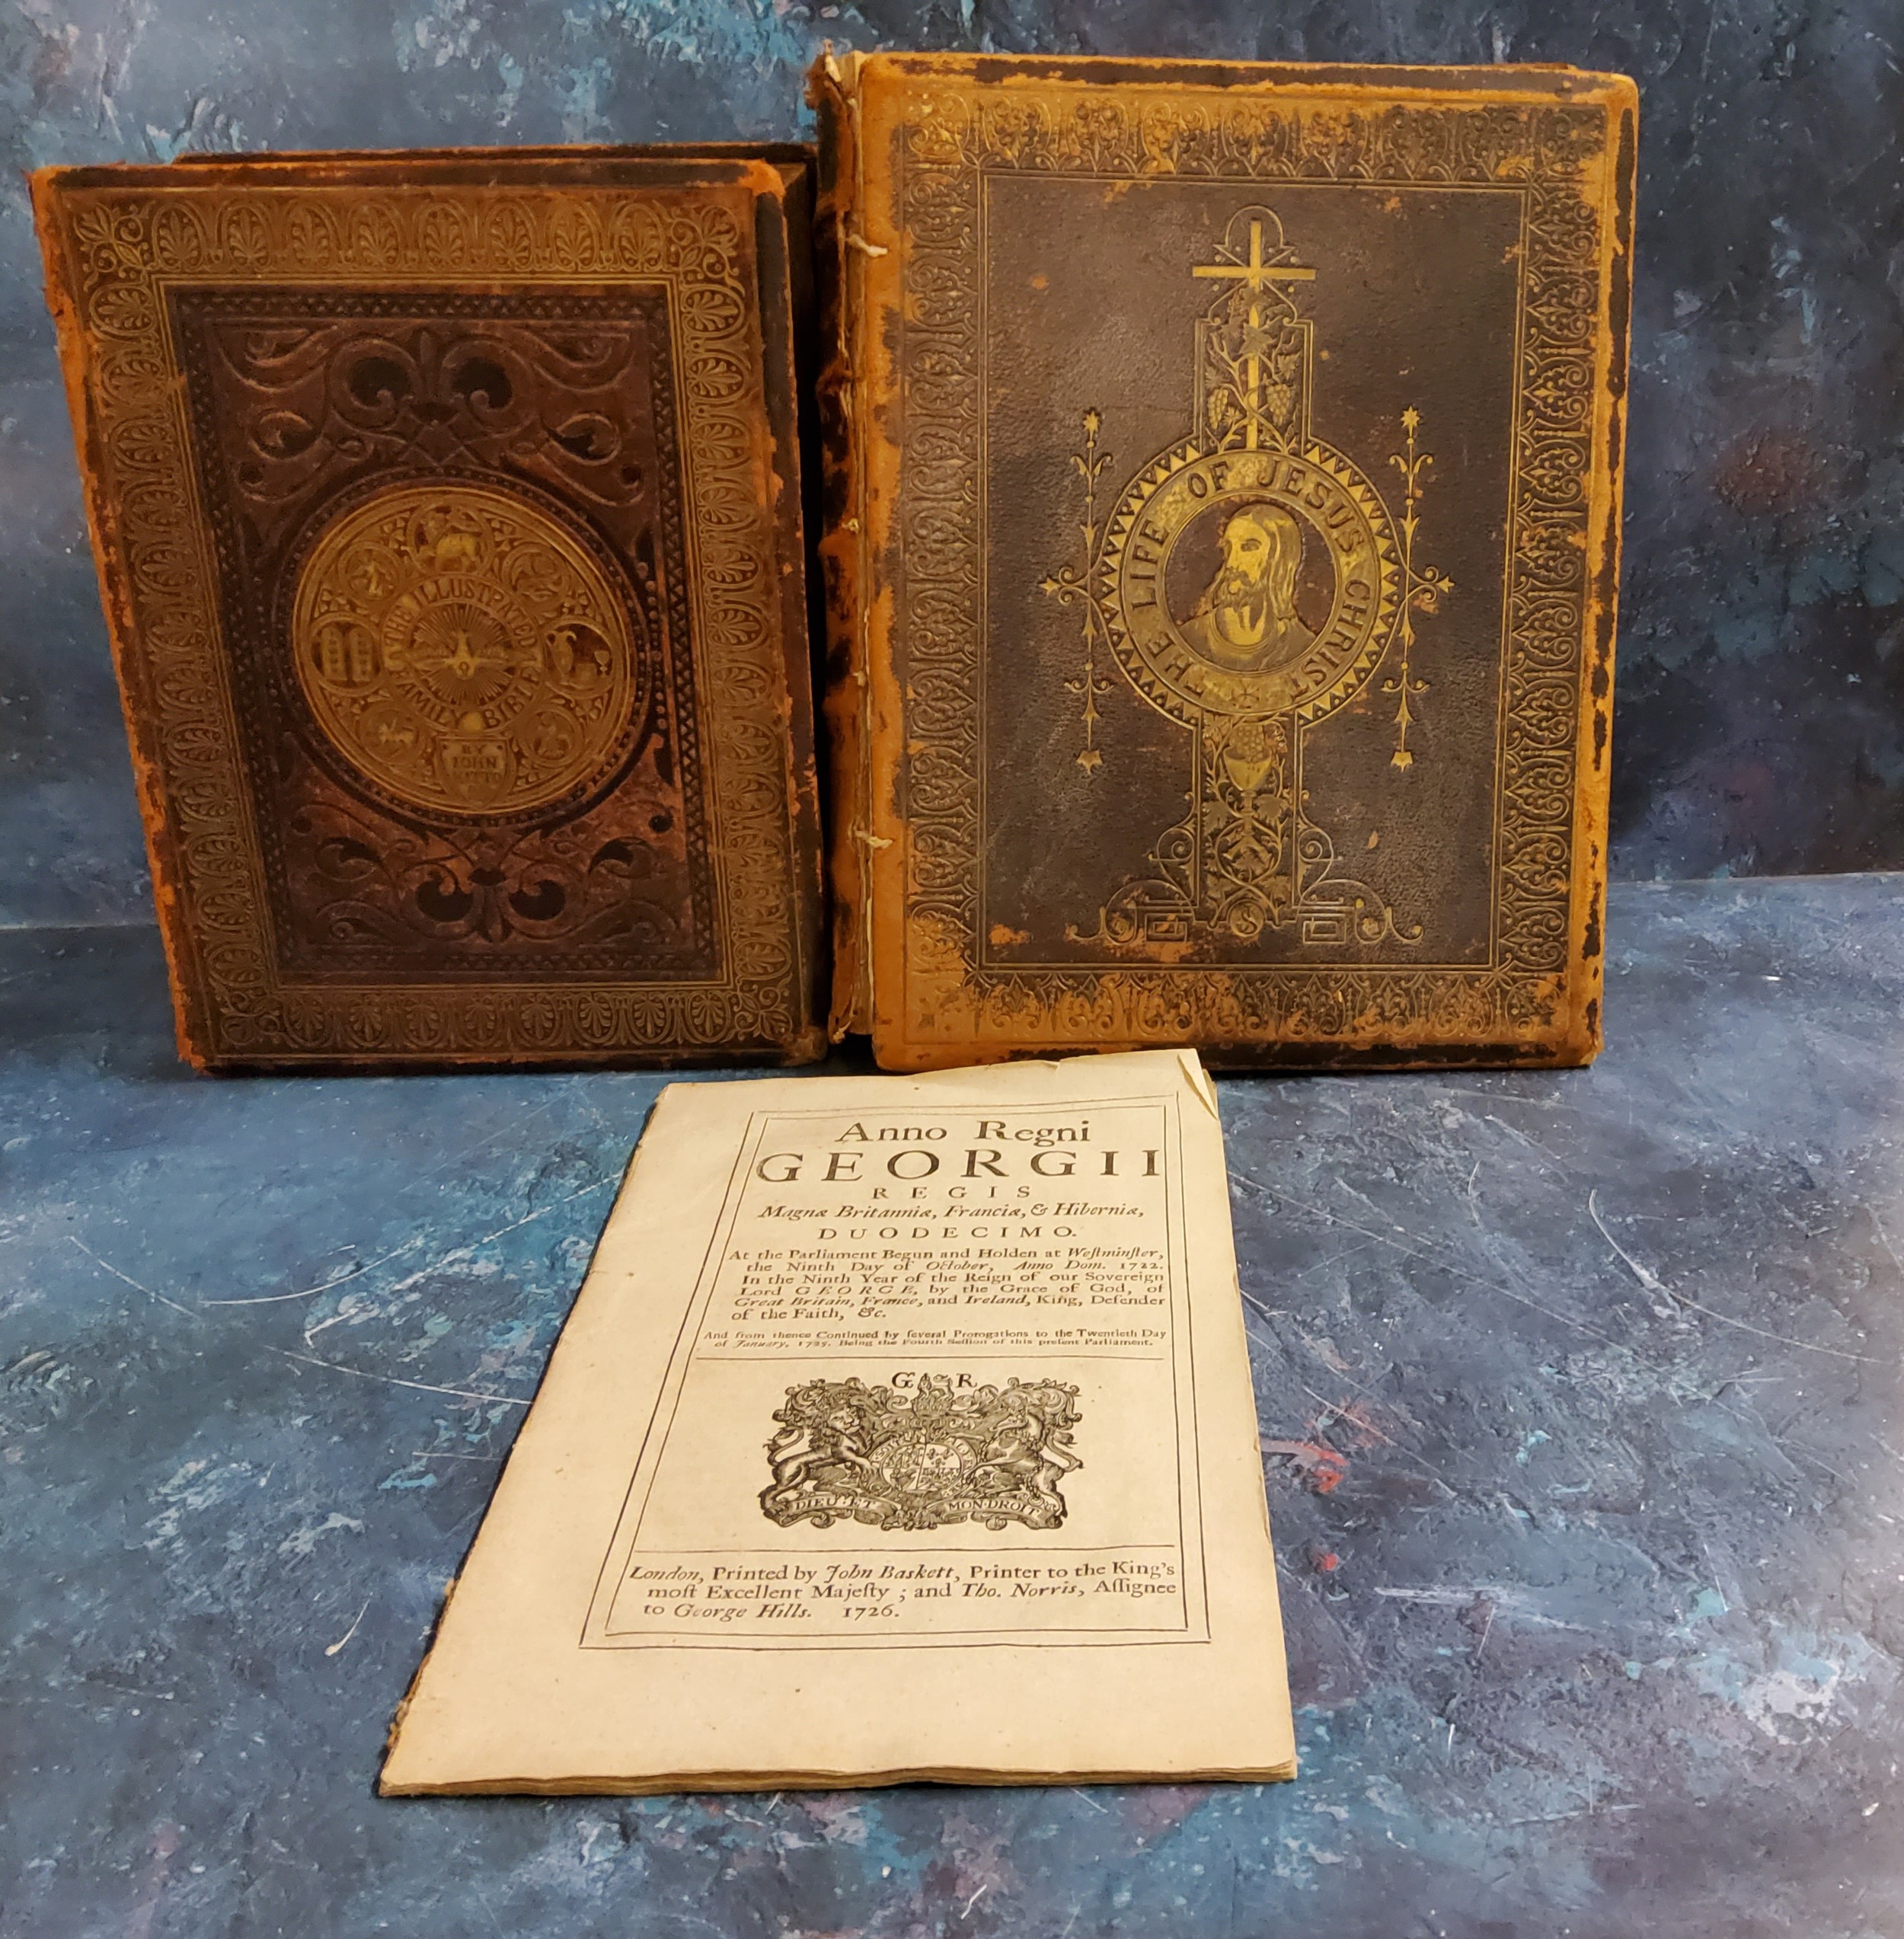 John Kitto, "The Illustrated Family Bible", published James Sangster & Co., leather-bound, c.